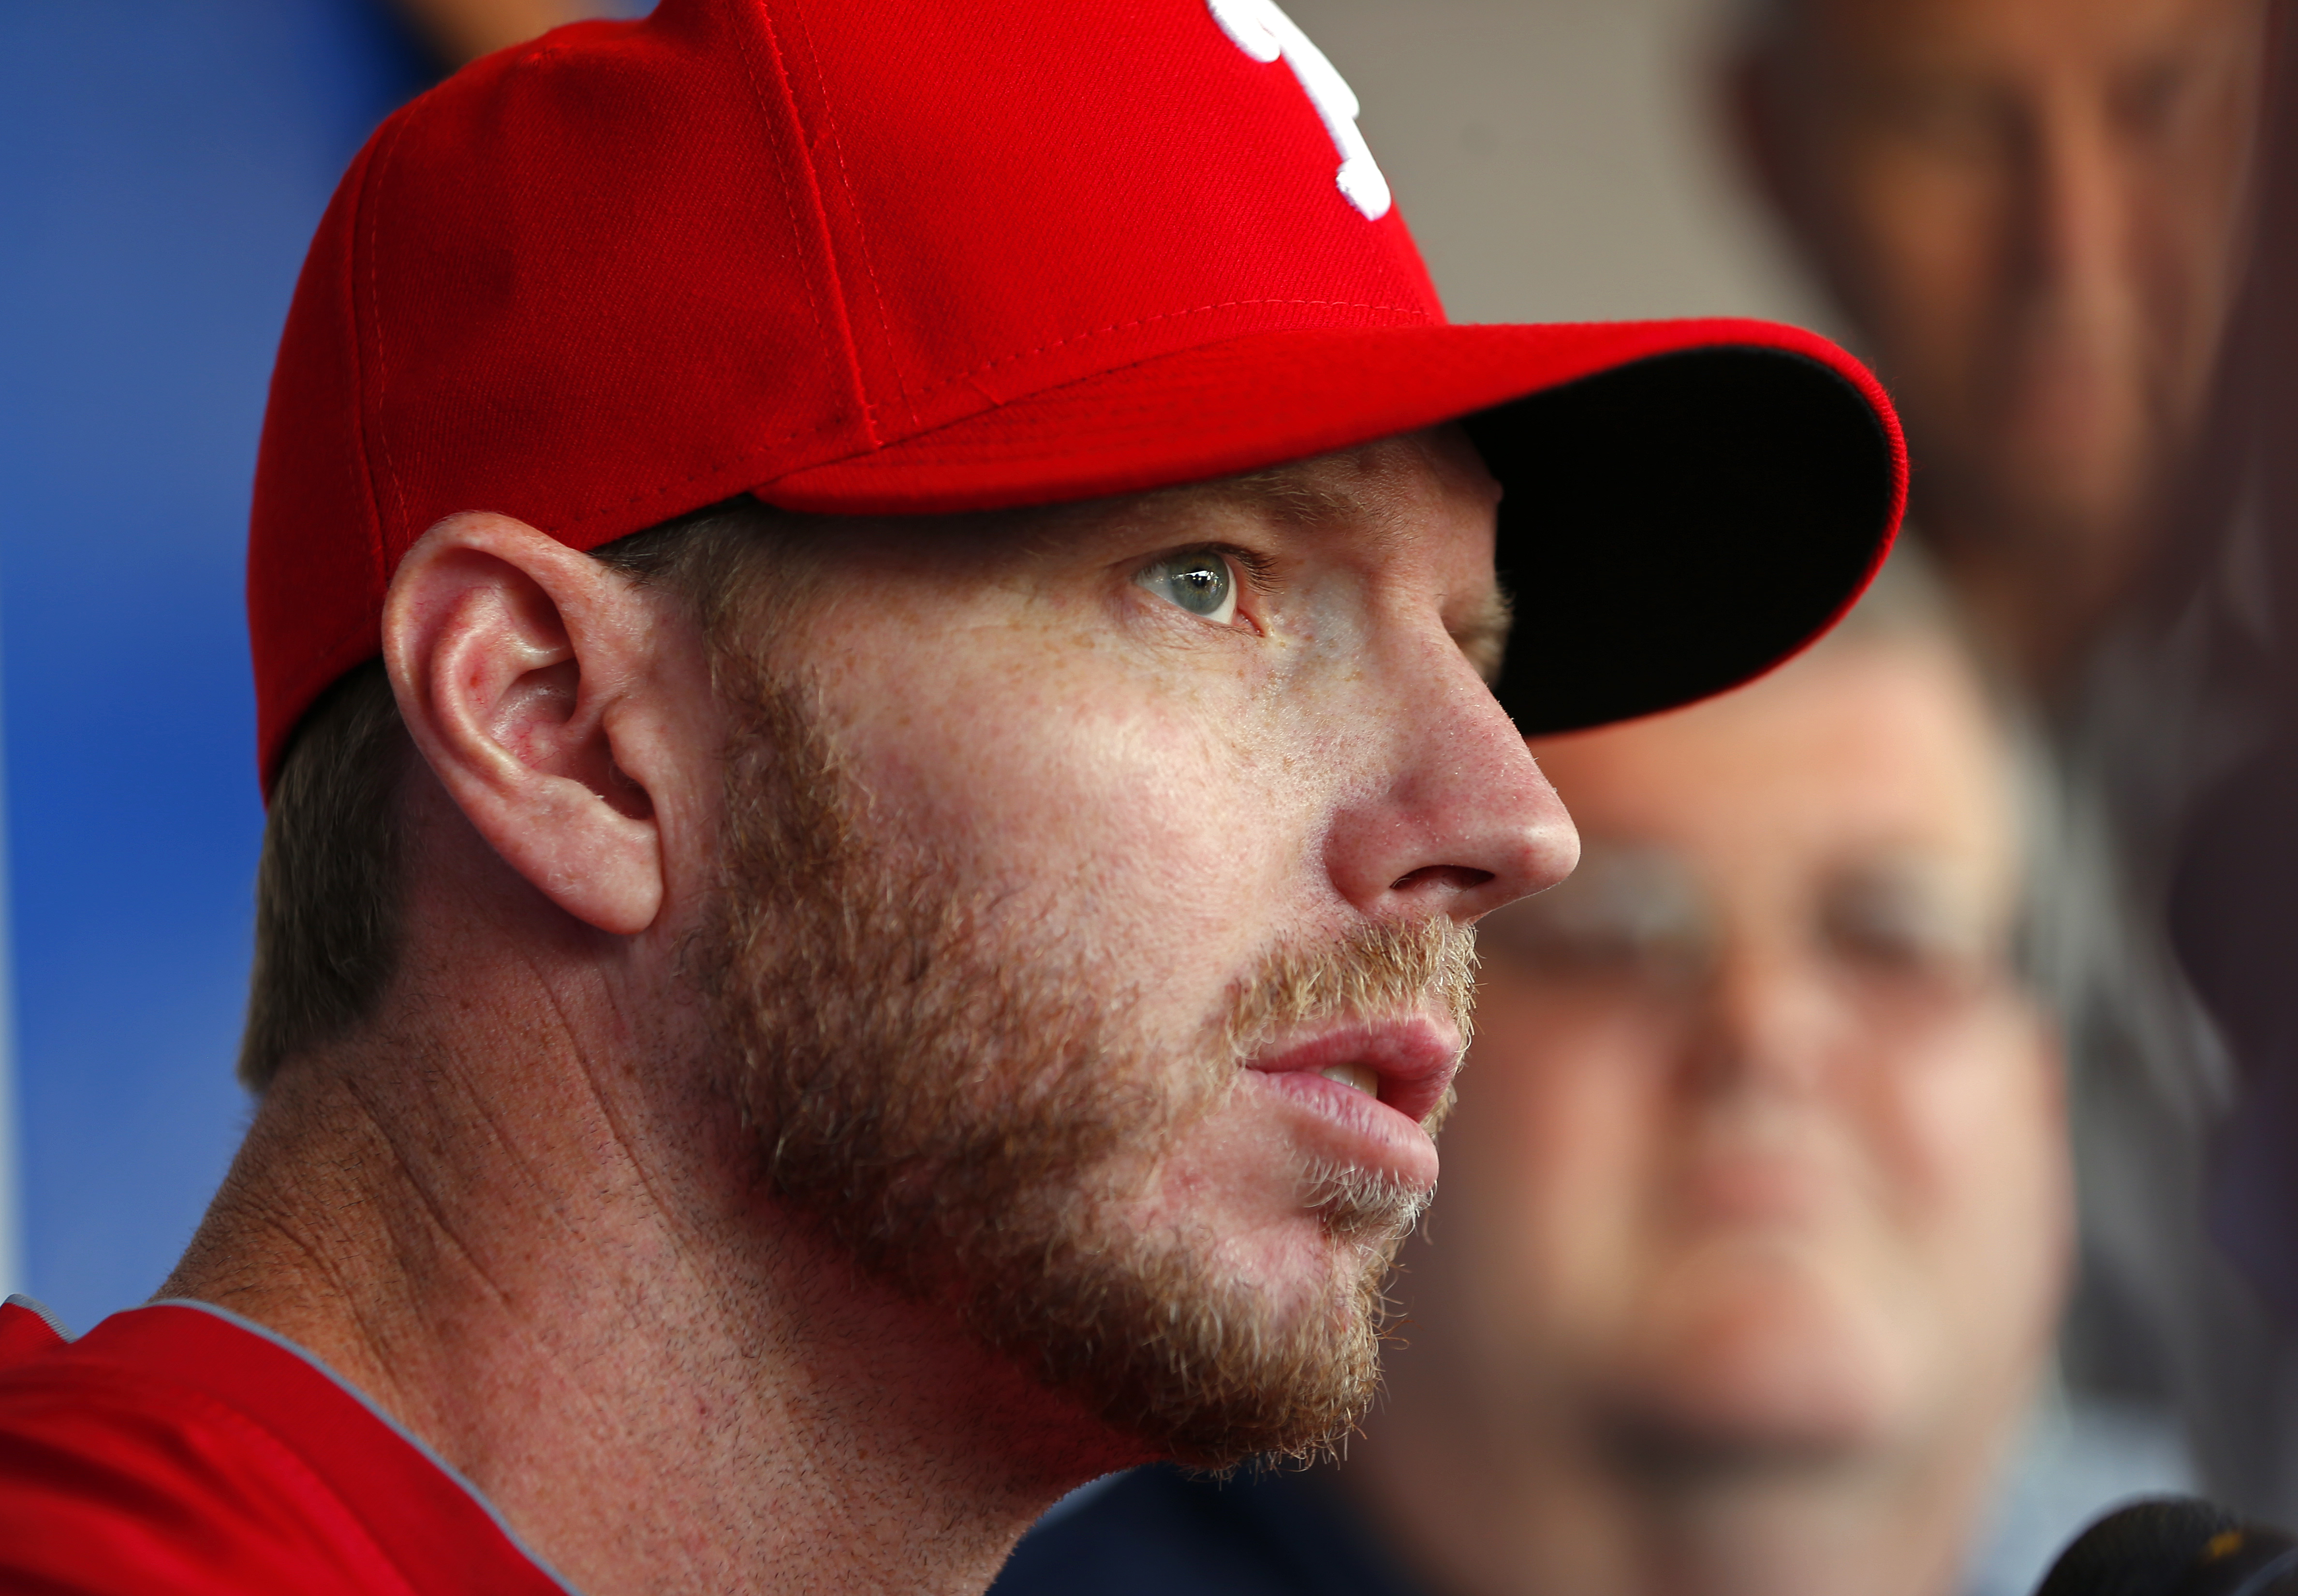 Toronto Blue Jays: Reactions from the sports world to Roy Halladay's death